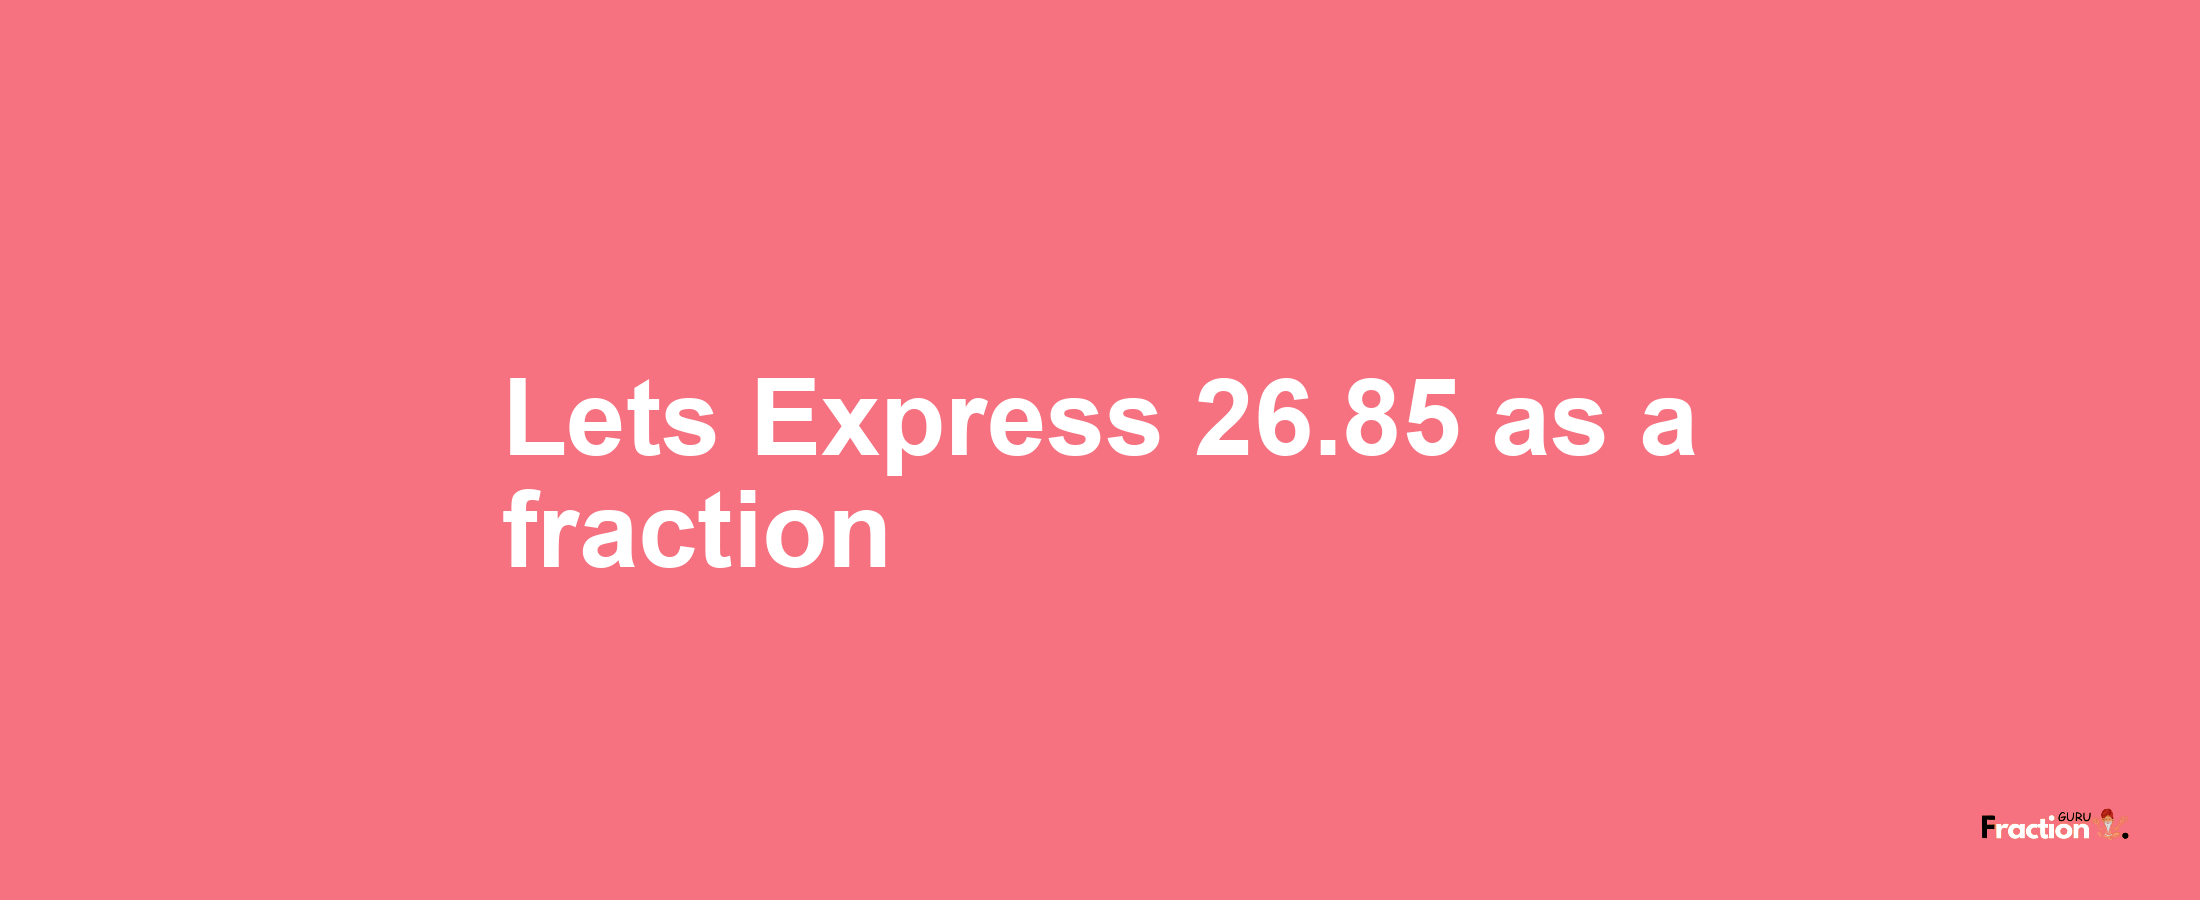 Lets Express 26.85 as afraction